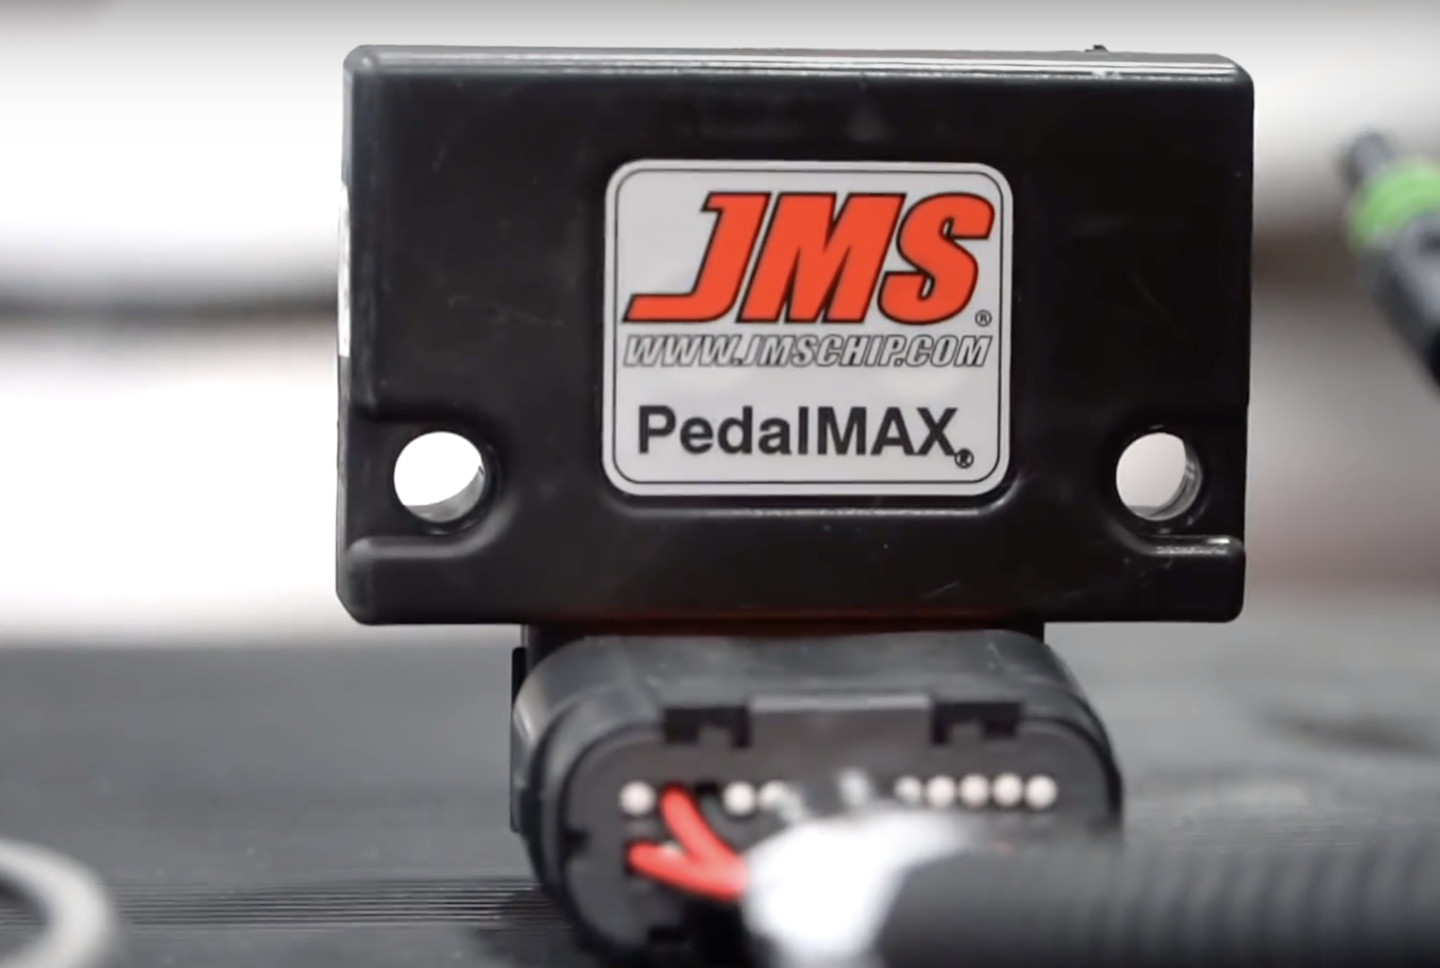 Father's Day gift of JMS PedalMAX